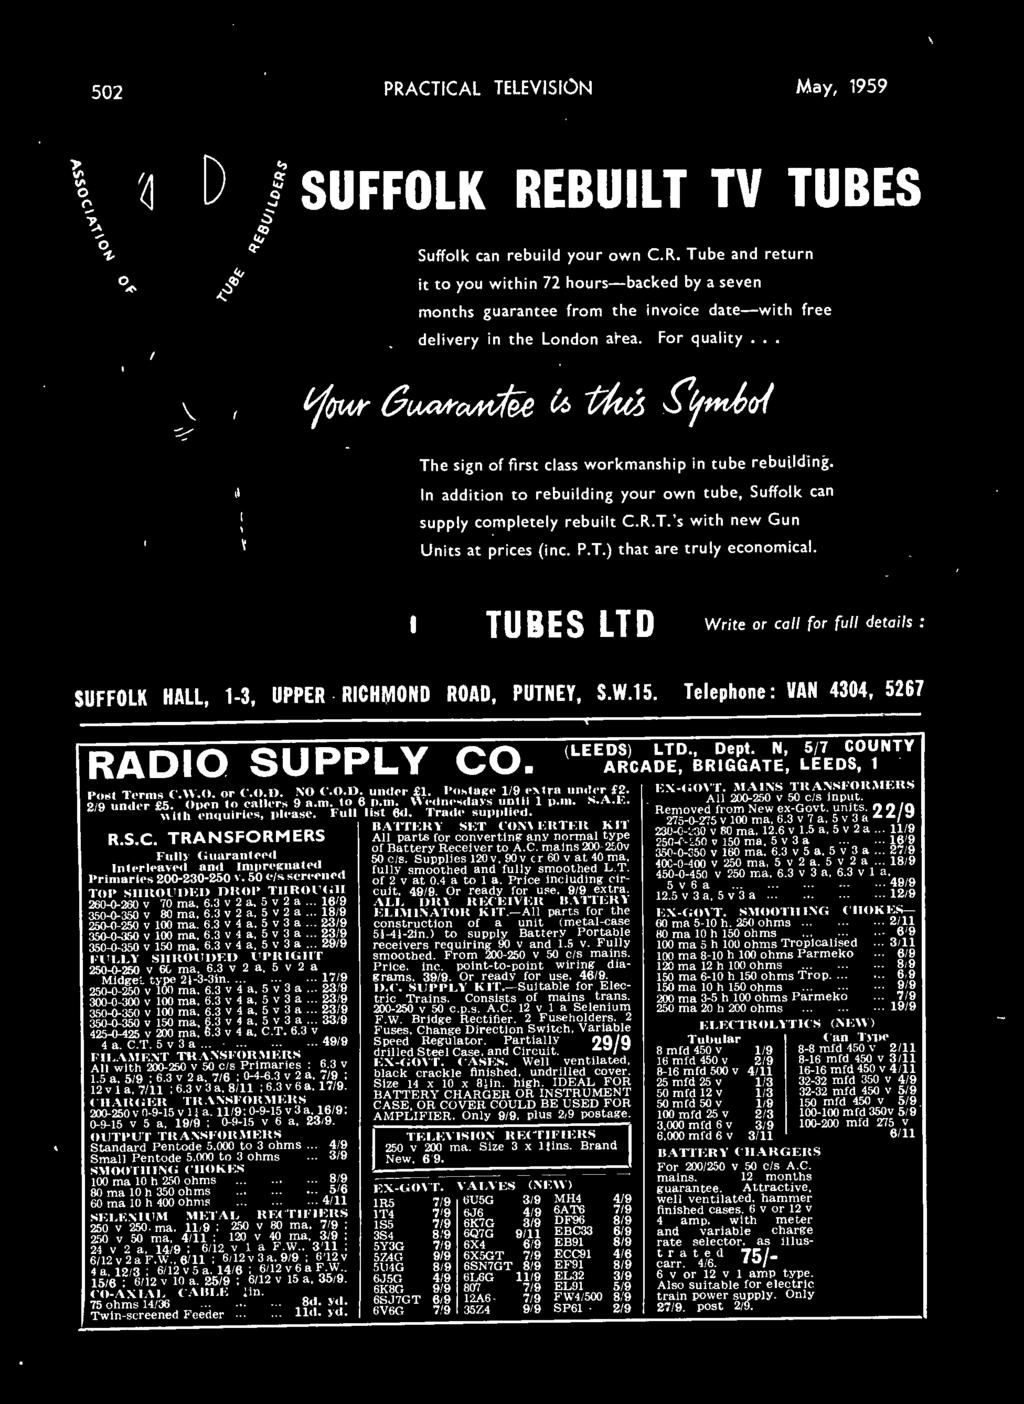 P.T.) that are truly economical. SUFFOLK TUBES LTD Write or call for full details : SUFFOLK HALL, 1-3, UPPER RICHMOND ROAD, PUTNEY, S.W.15. Telephone : VAN 4304, 5267 RADIO SUPPLY CO (LEEDS) LTD.